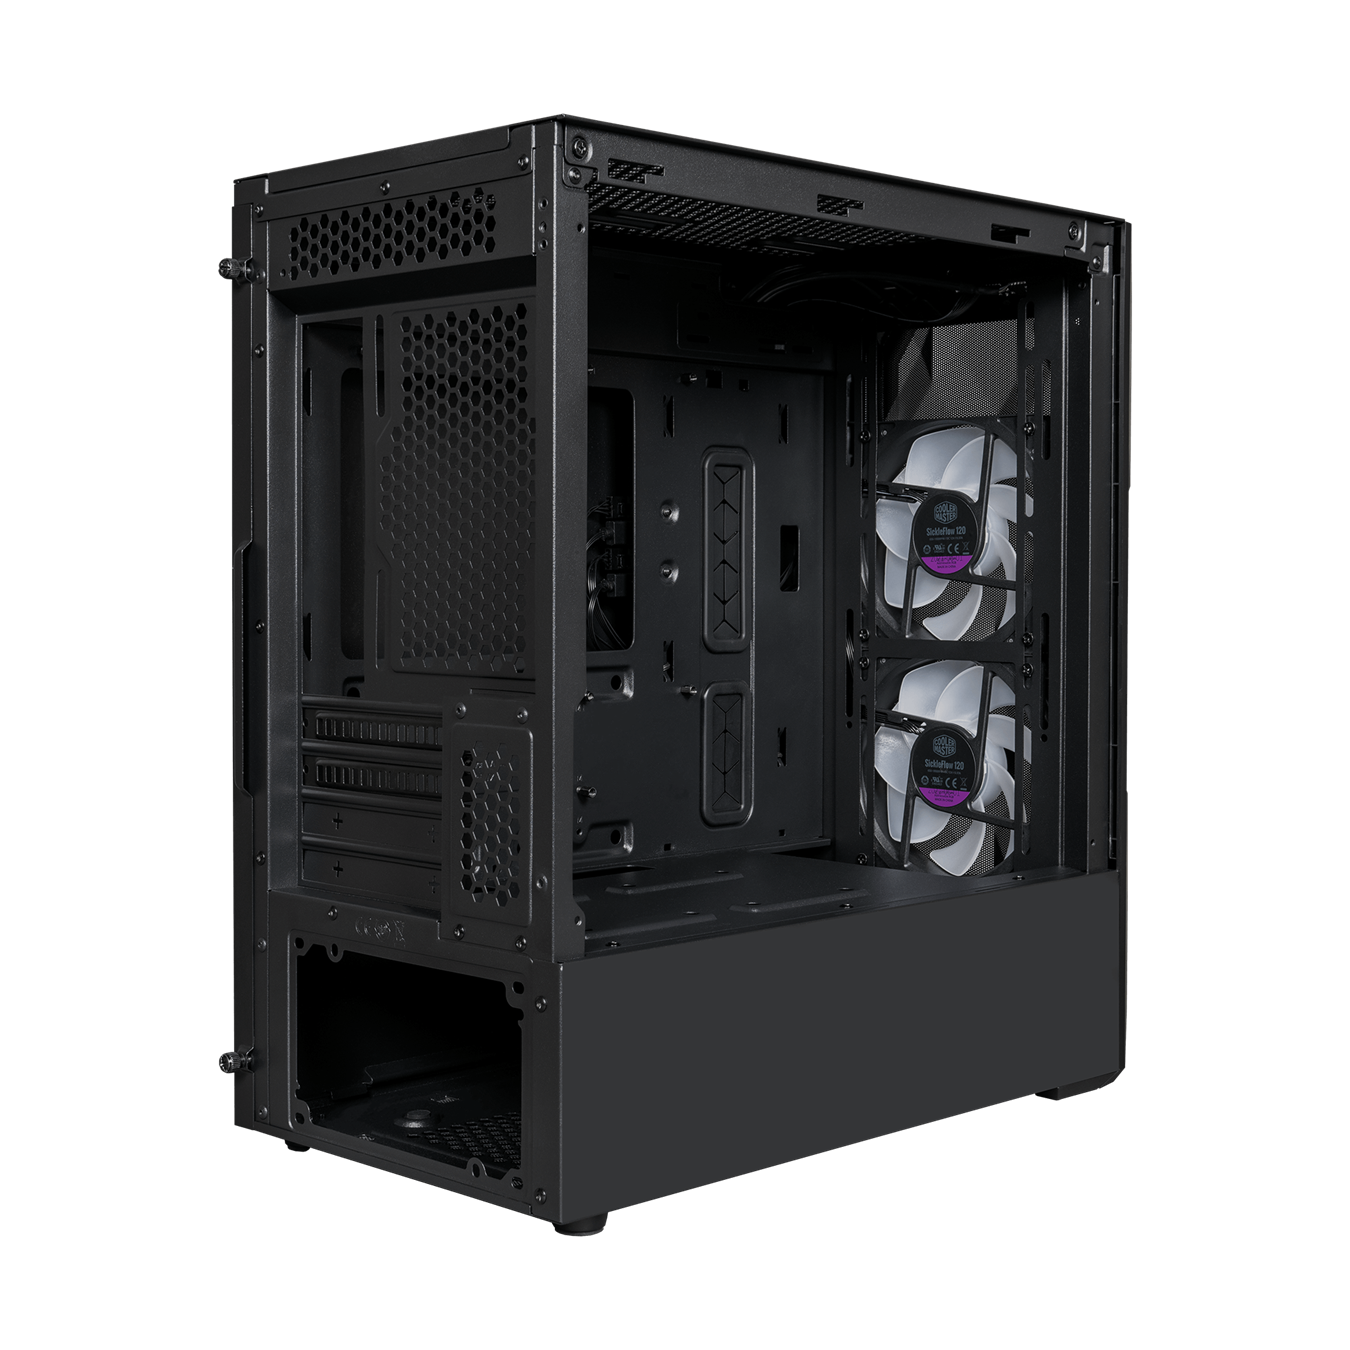 Cooler Master TD300 Mesh Computer Case Black 280mm Radiator Support ARGB & PWM Hub Included High Airflow Case 2 x 120mm ARGB Fans Pre-Installed Gaming Case-Cabinet-Cooler Master-computerspace